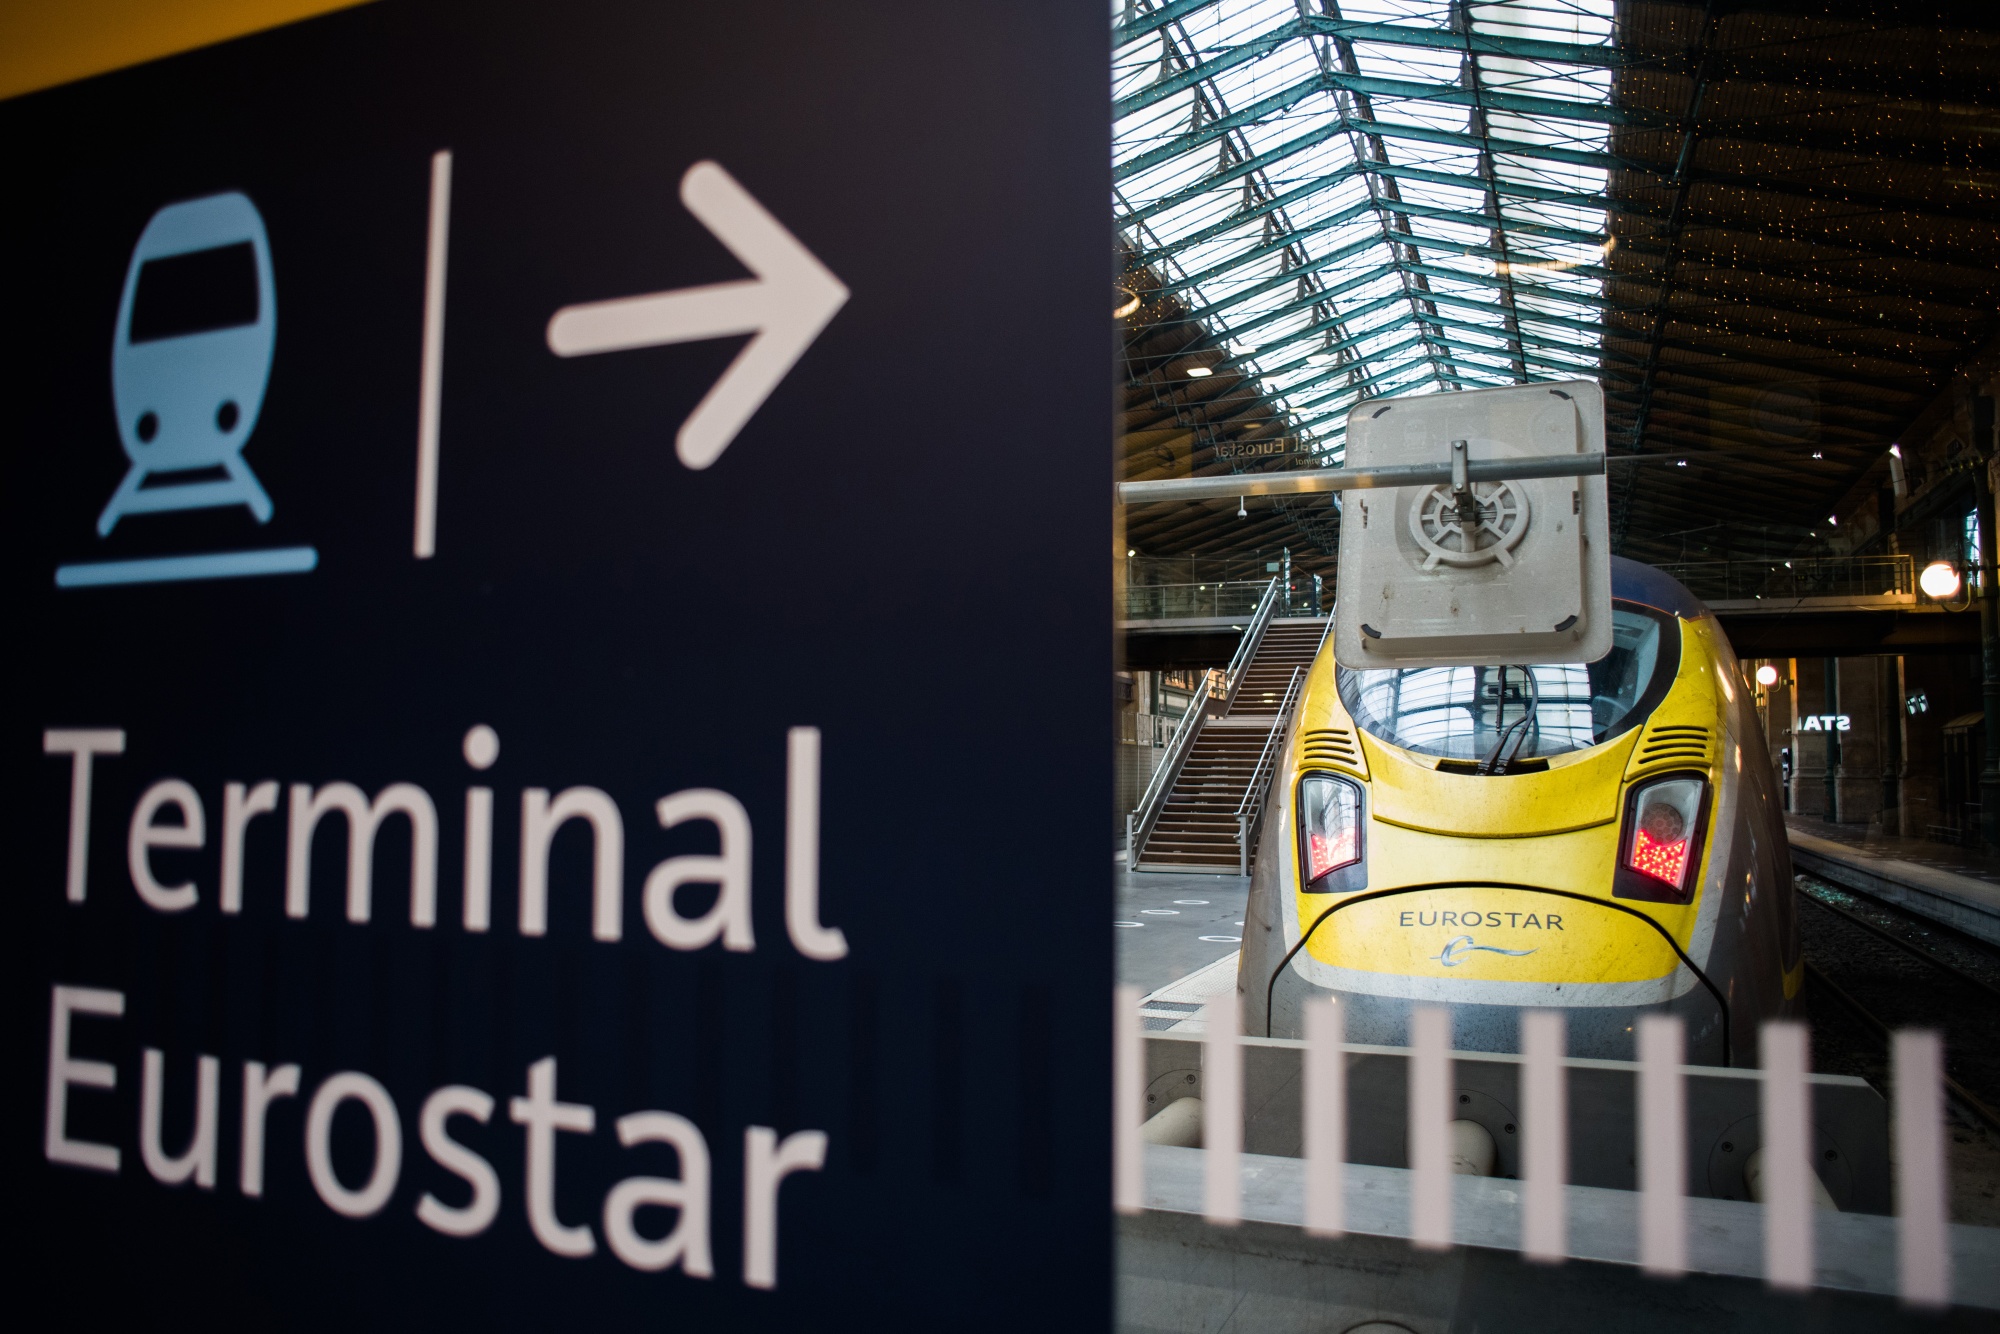 Eurostar has seen a surge in demand as travel rebounds after the pandemic.